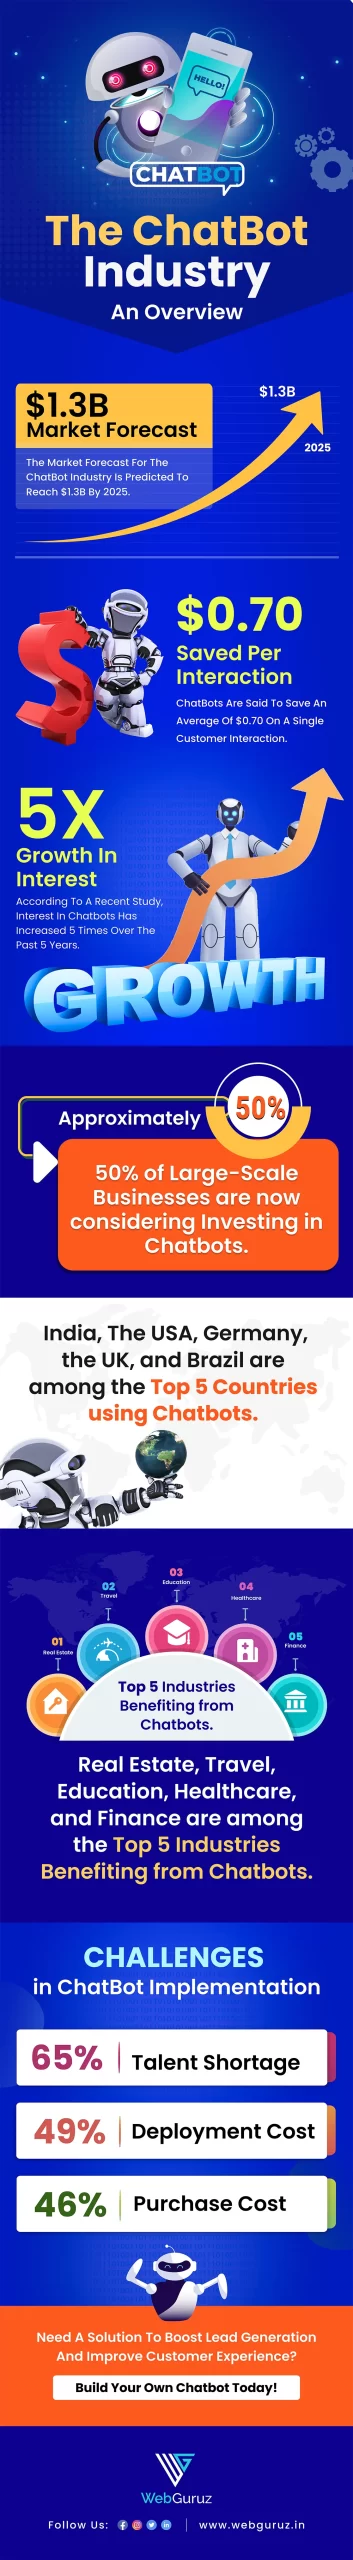 The ChatBot Industry: An Overview